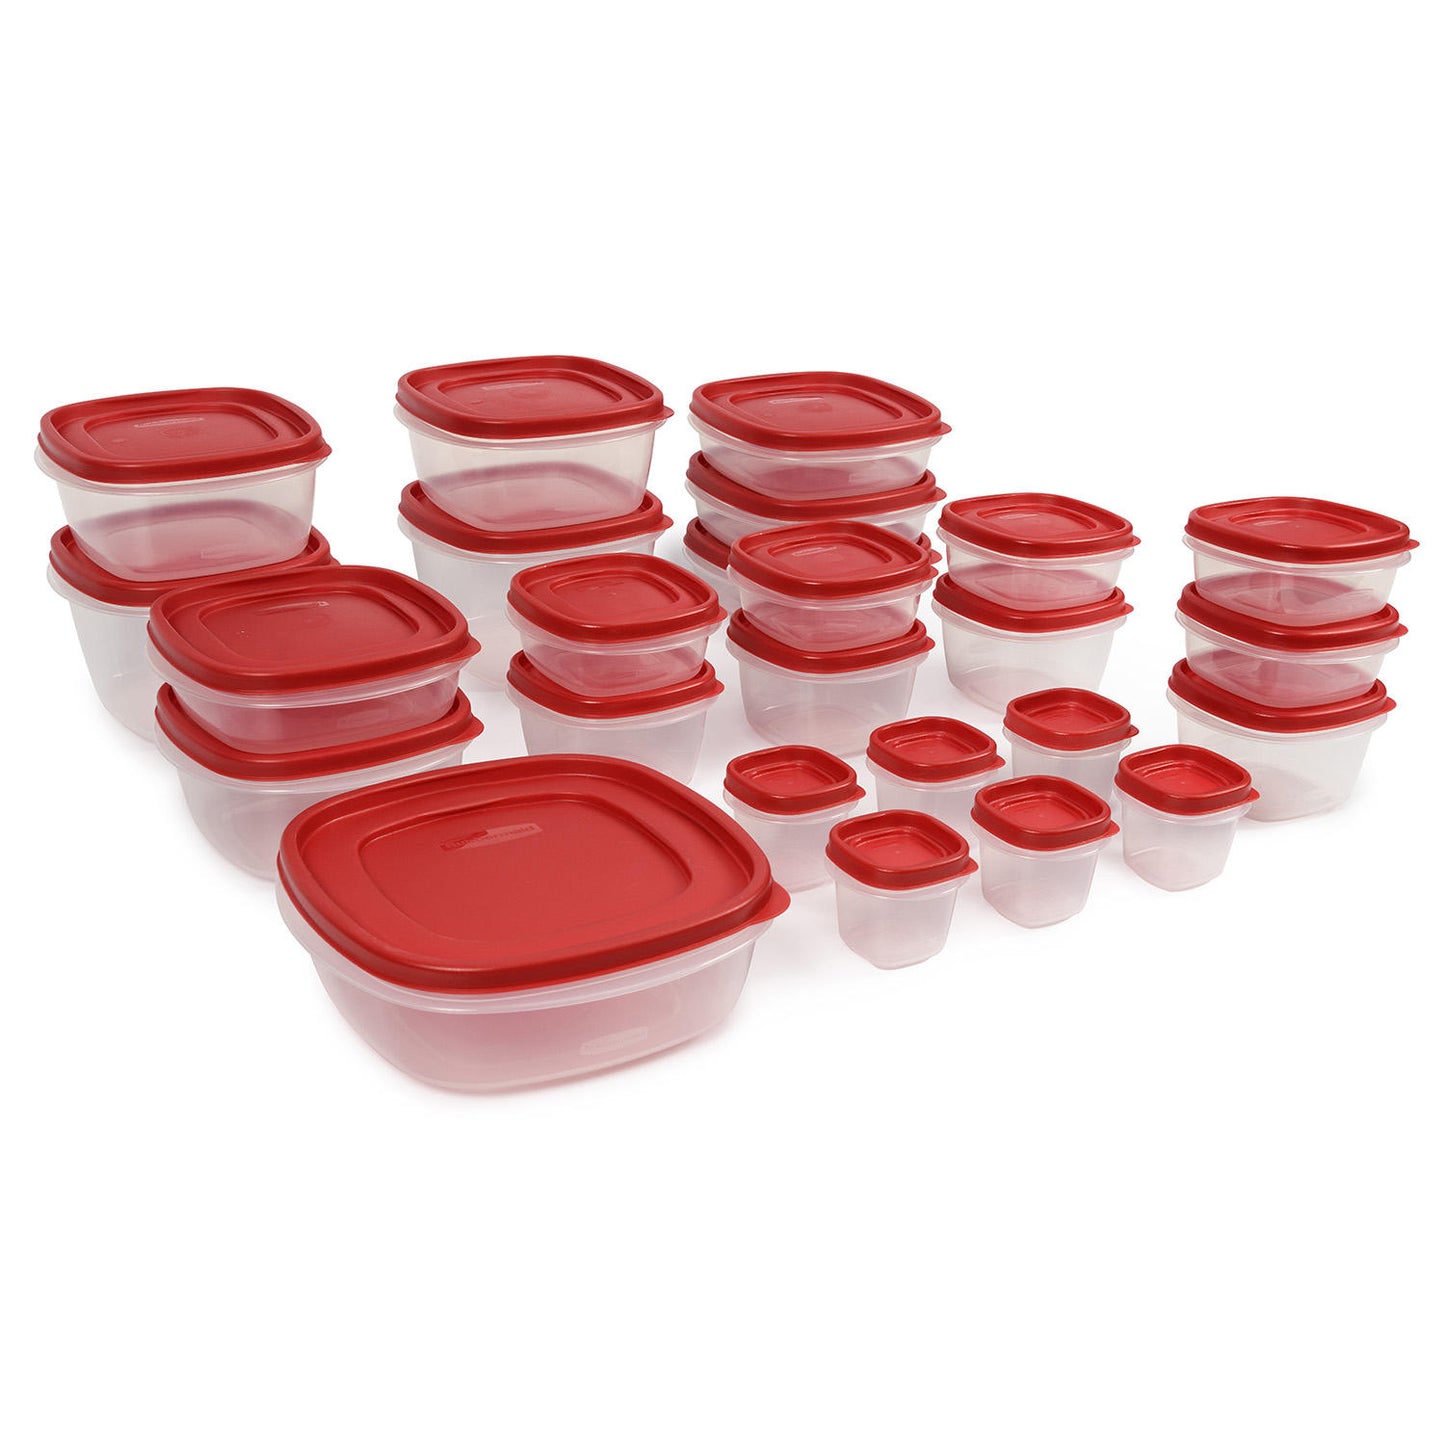 Rubbermaid Easy Find Lids Food Storage Containers, 1.25 Cup, Racer